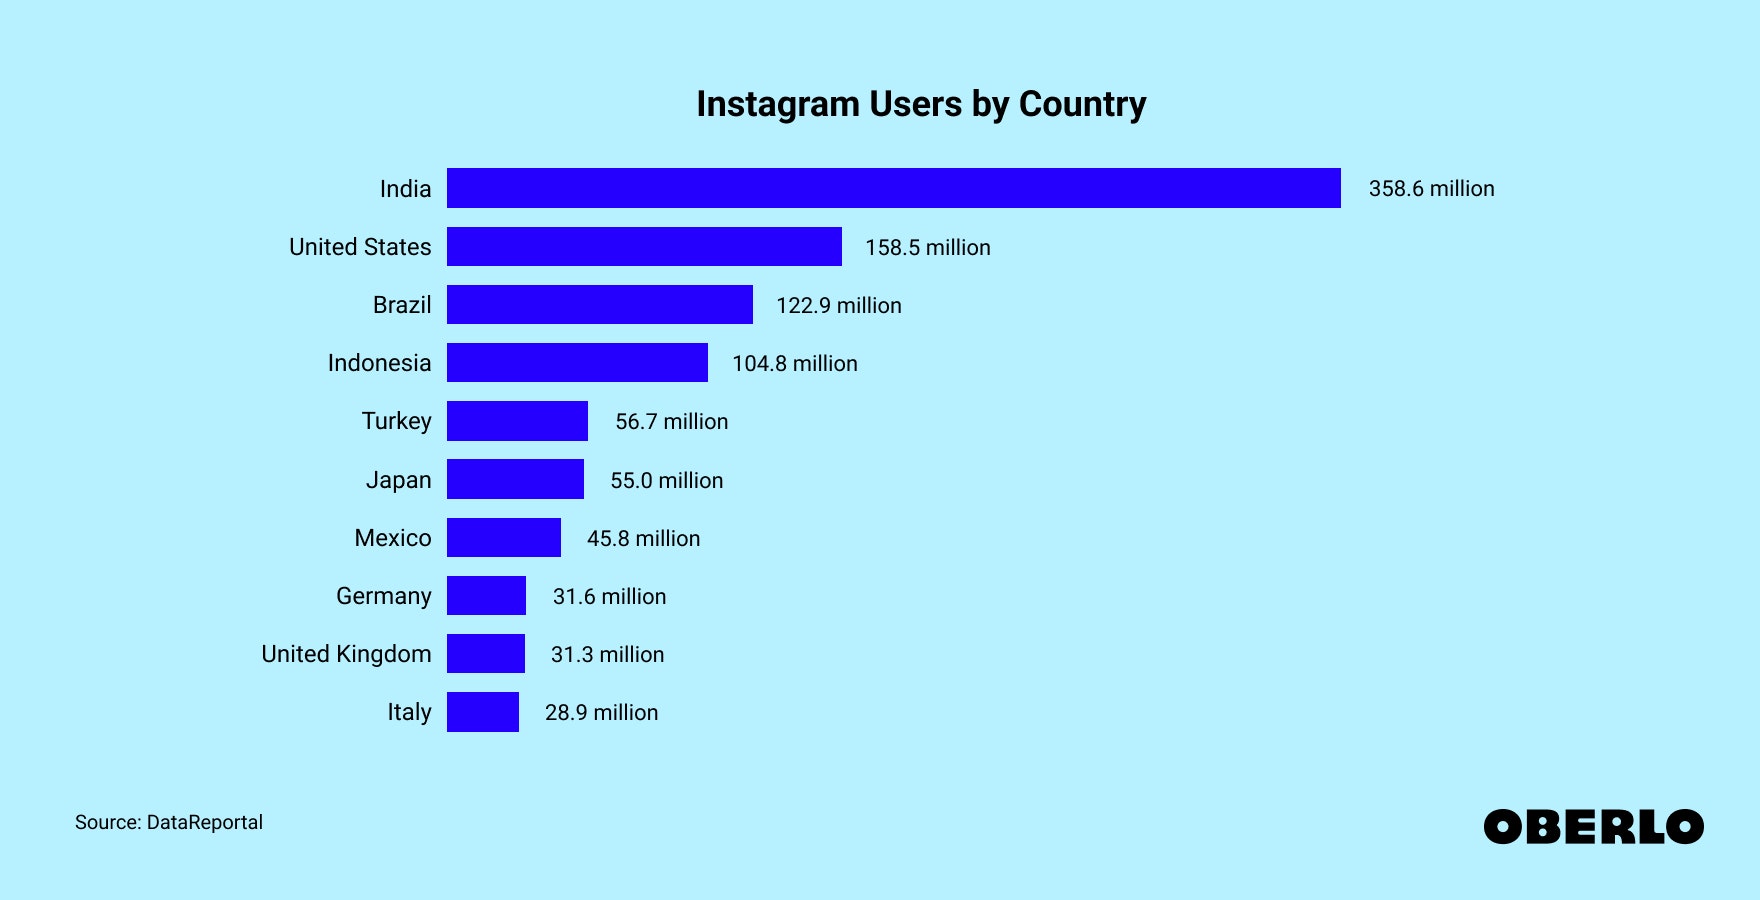 Chart showing Instagram Users by Country